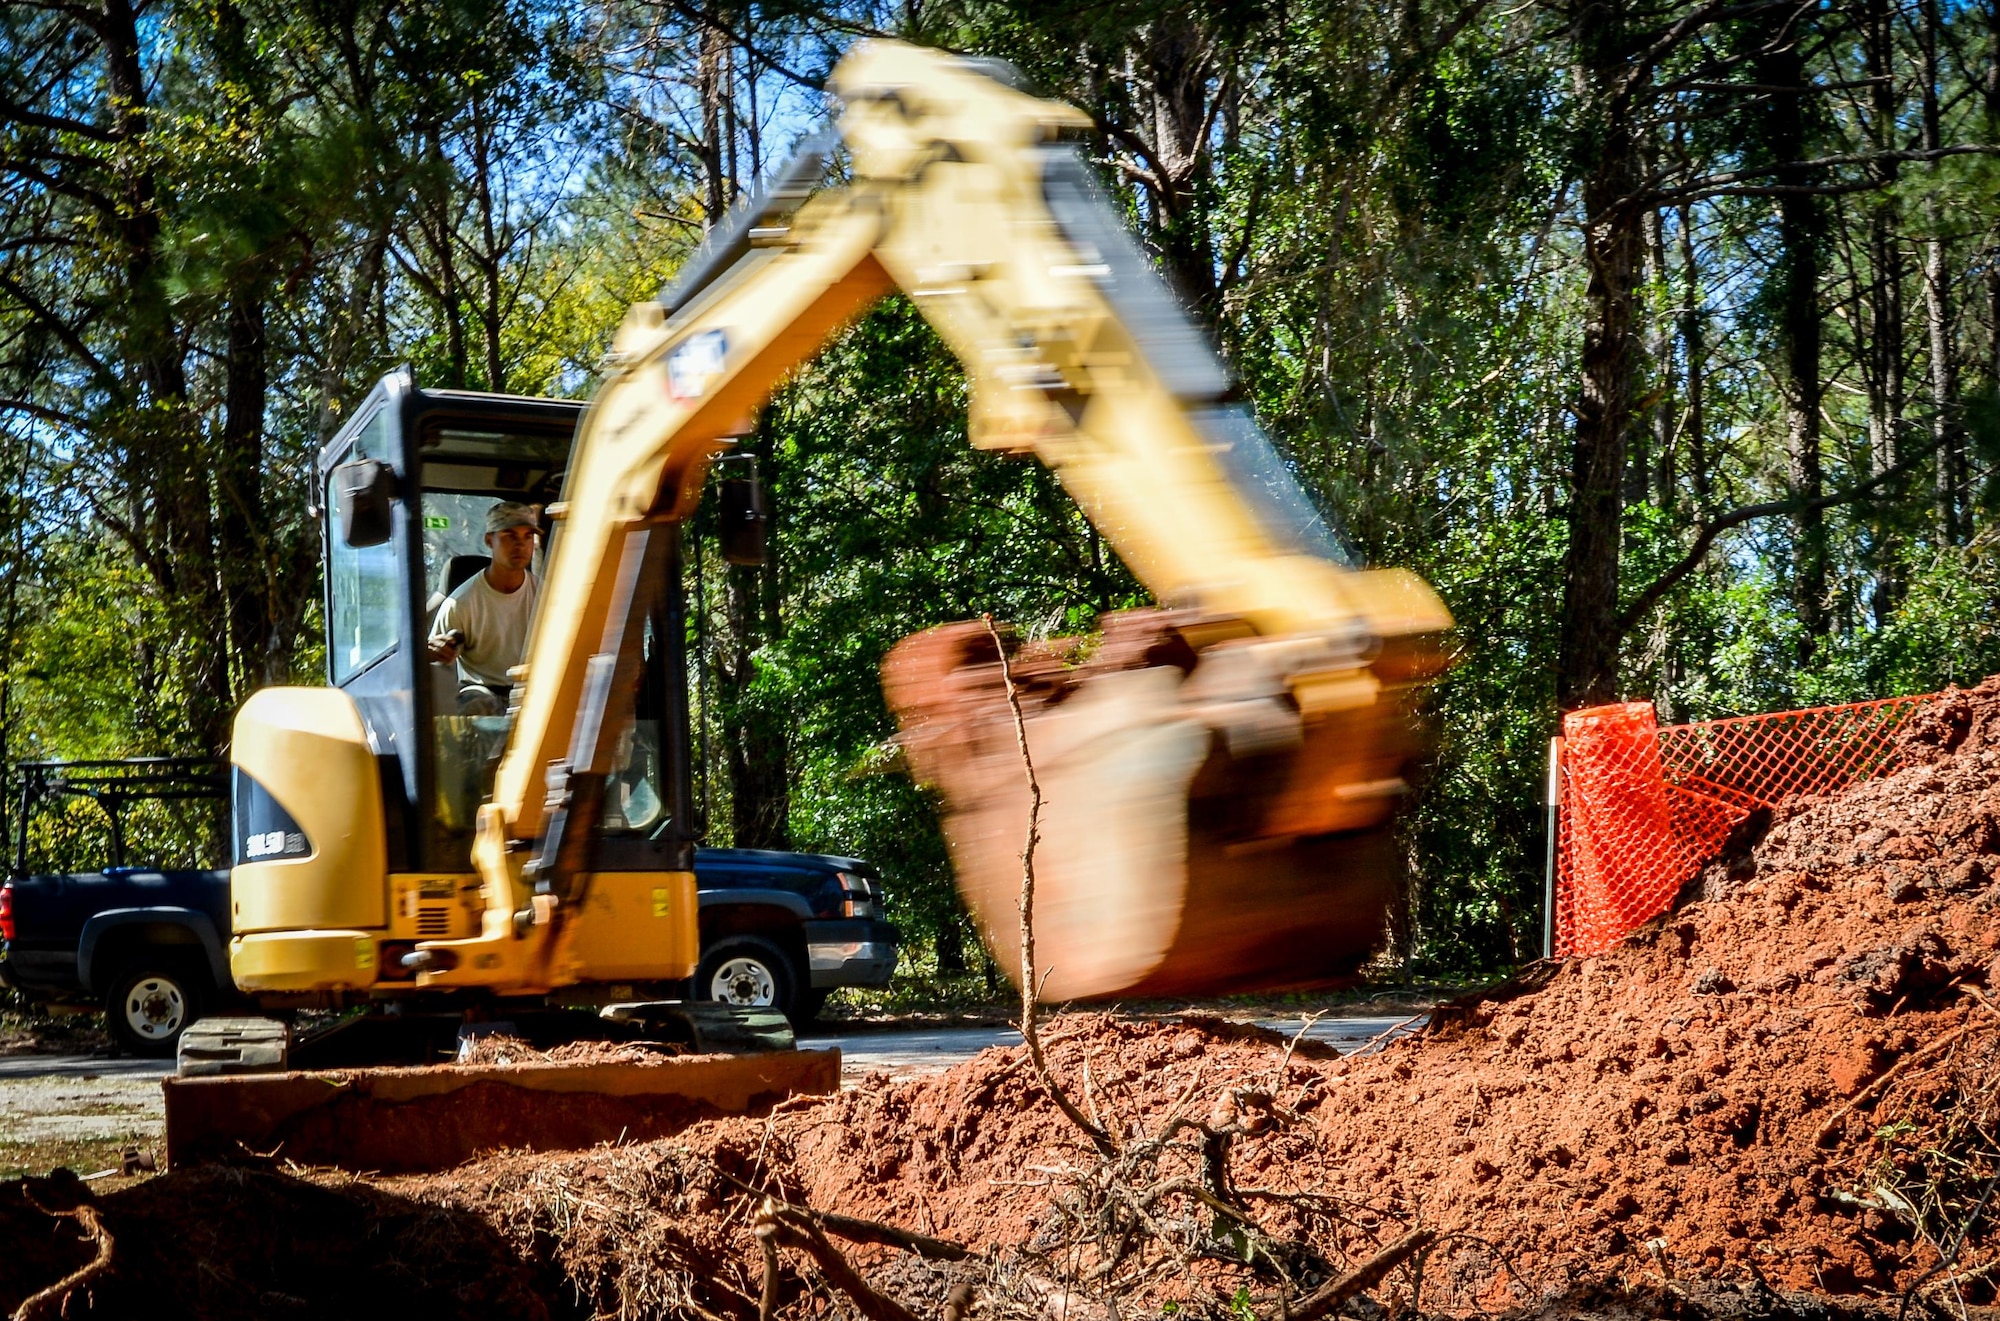 U.S. Air Force Staff Sgt. Justin Waters, 20th Civil Engineer Squadron pavement and construction equipment journeyman, clears dirt from around a broken water pipe at Shaw Air Force Base, S.C., Oct. 13, 2016. Heavy equipment operators were needed to clear the dirt and debris so water and fuels technicians could fix the water pipe. (U.S. Air Force photo by Senior Airman Diana M. Cossaboom)